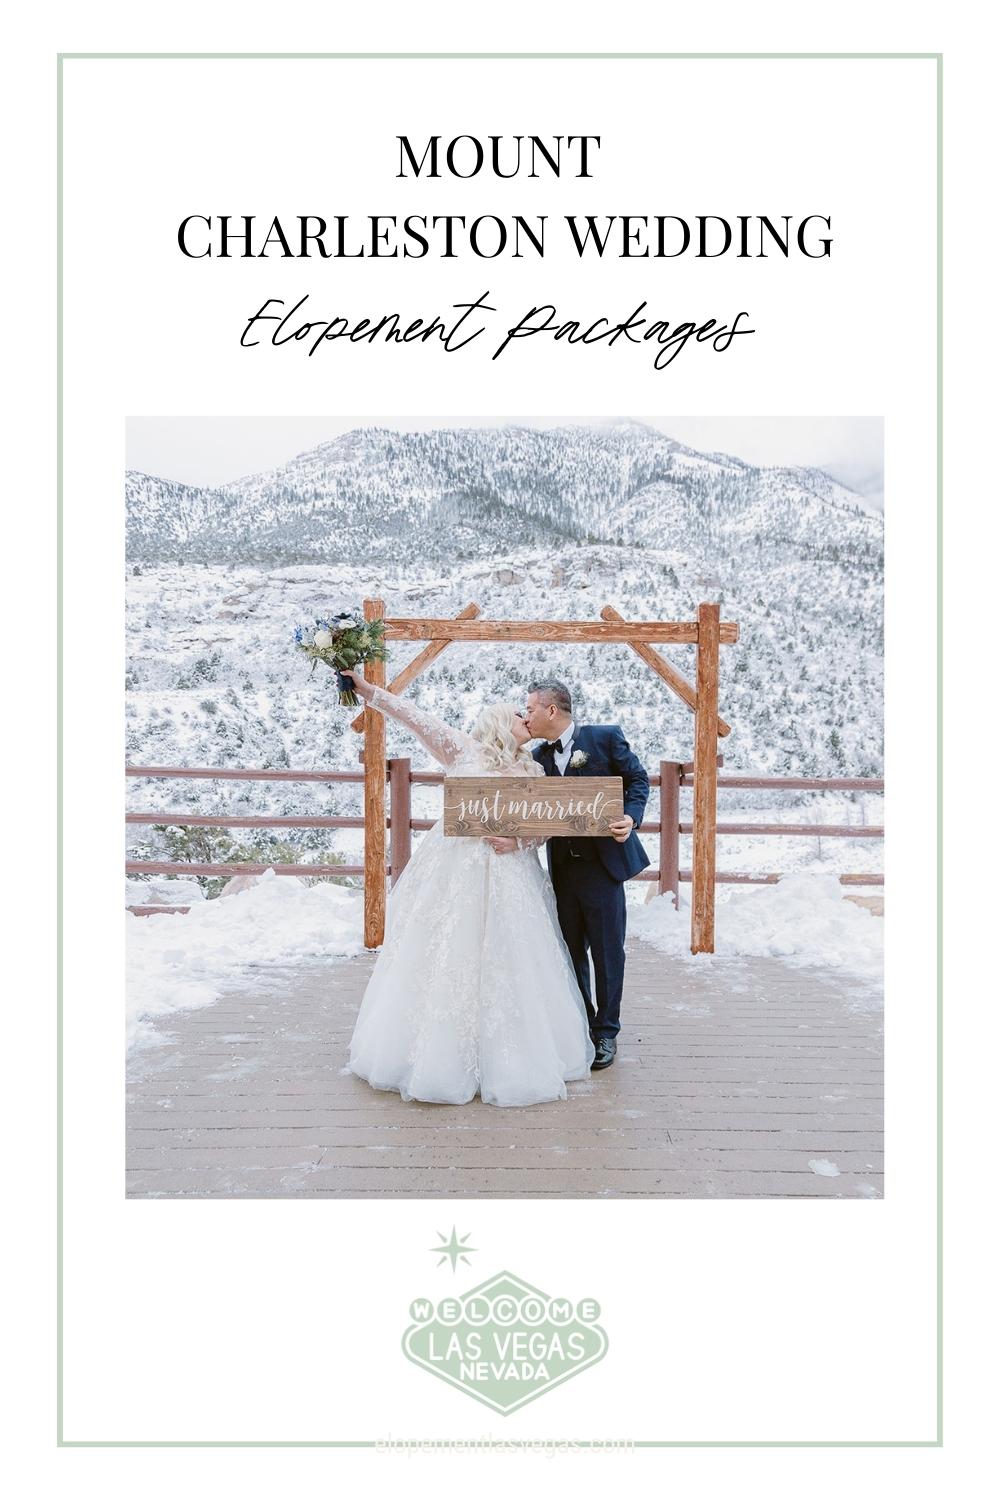 Bride and groom sharing a kiss while holding up just married sign; image overlaid with text that reads Mount Charleston Wedding Elopement Packages